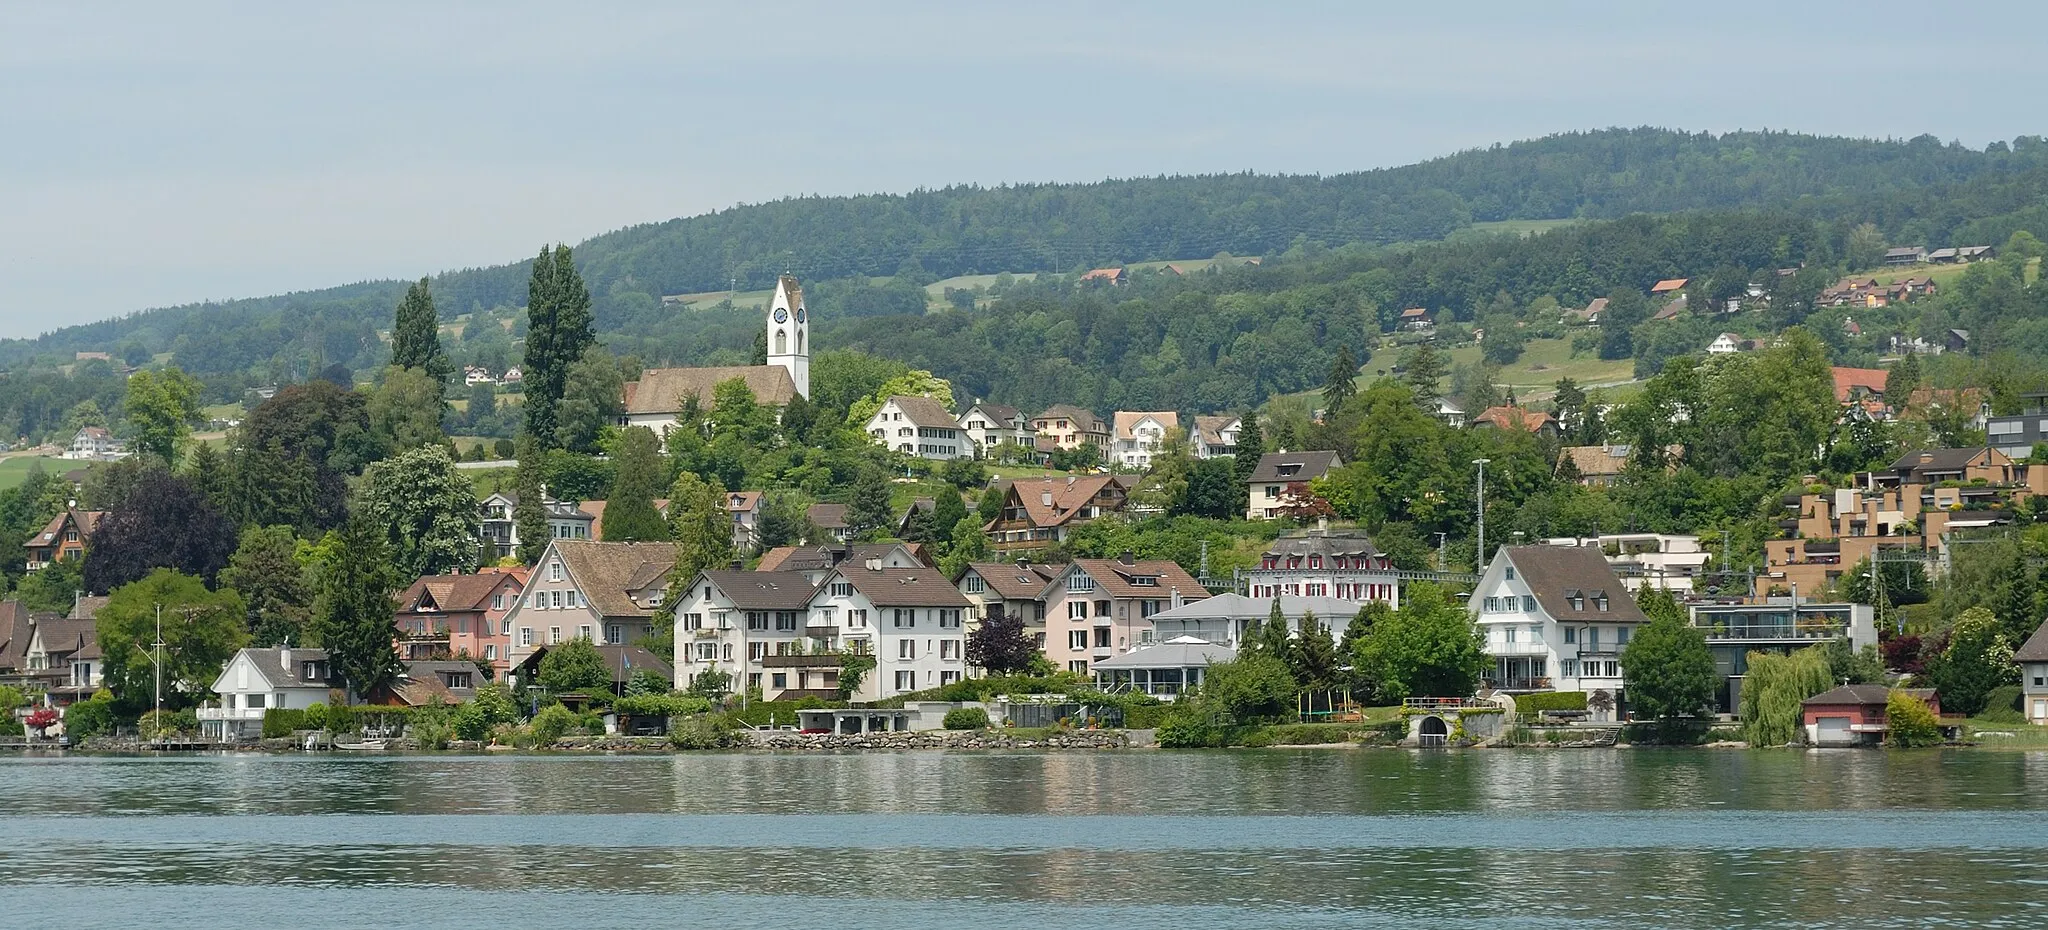 Photo showing: View of Uetikon am See from Lake Zürich.